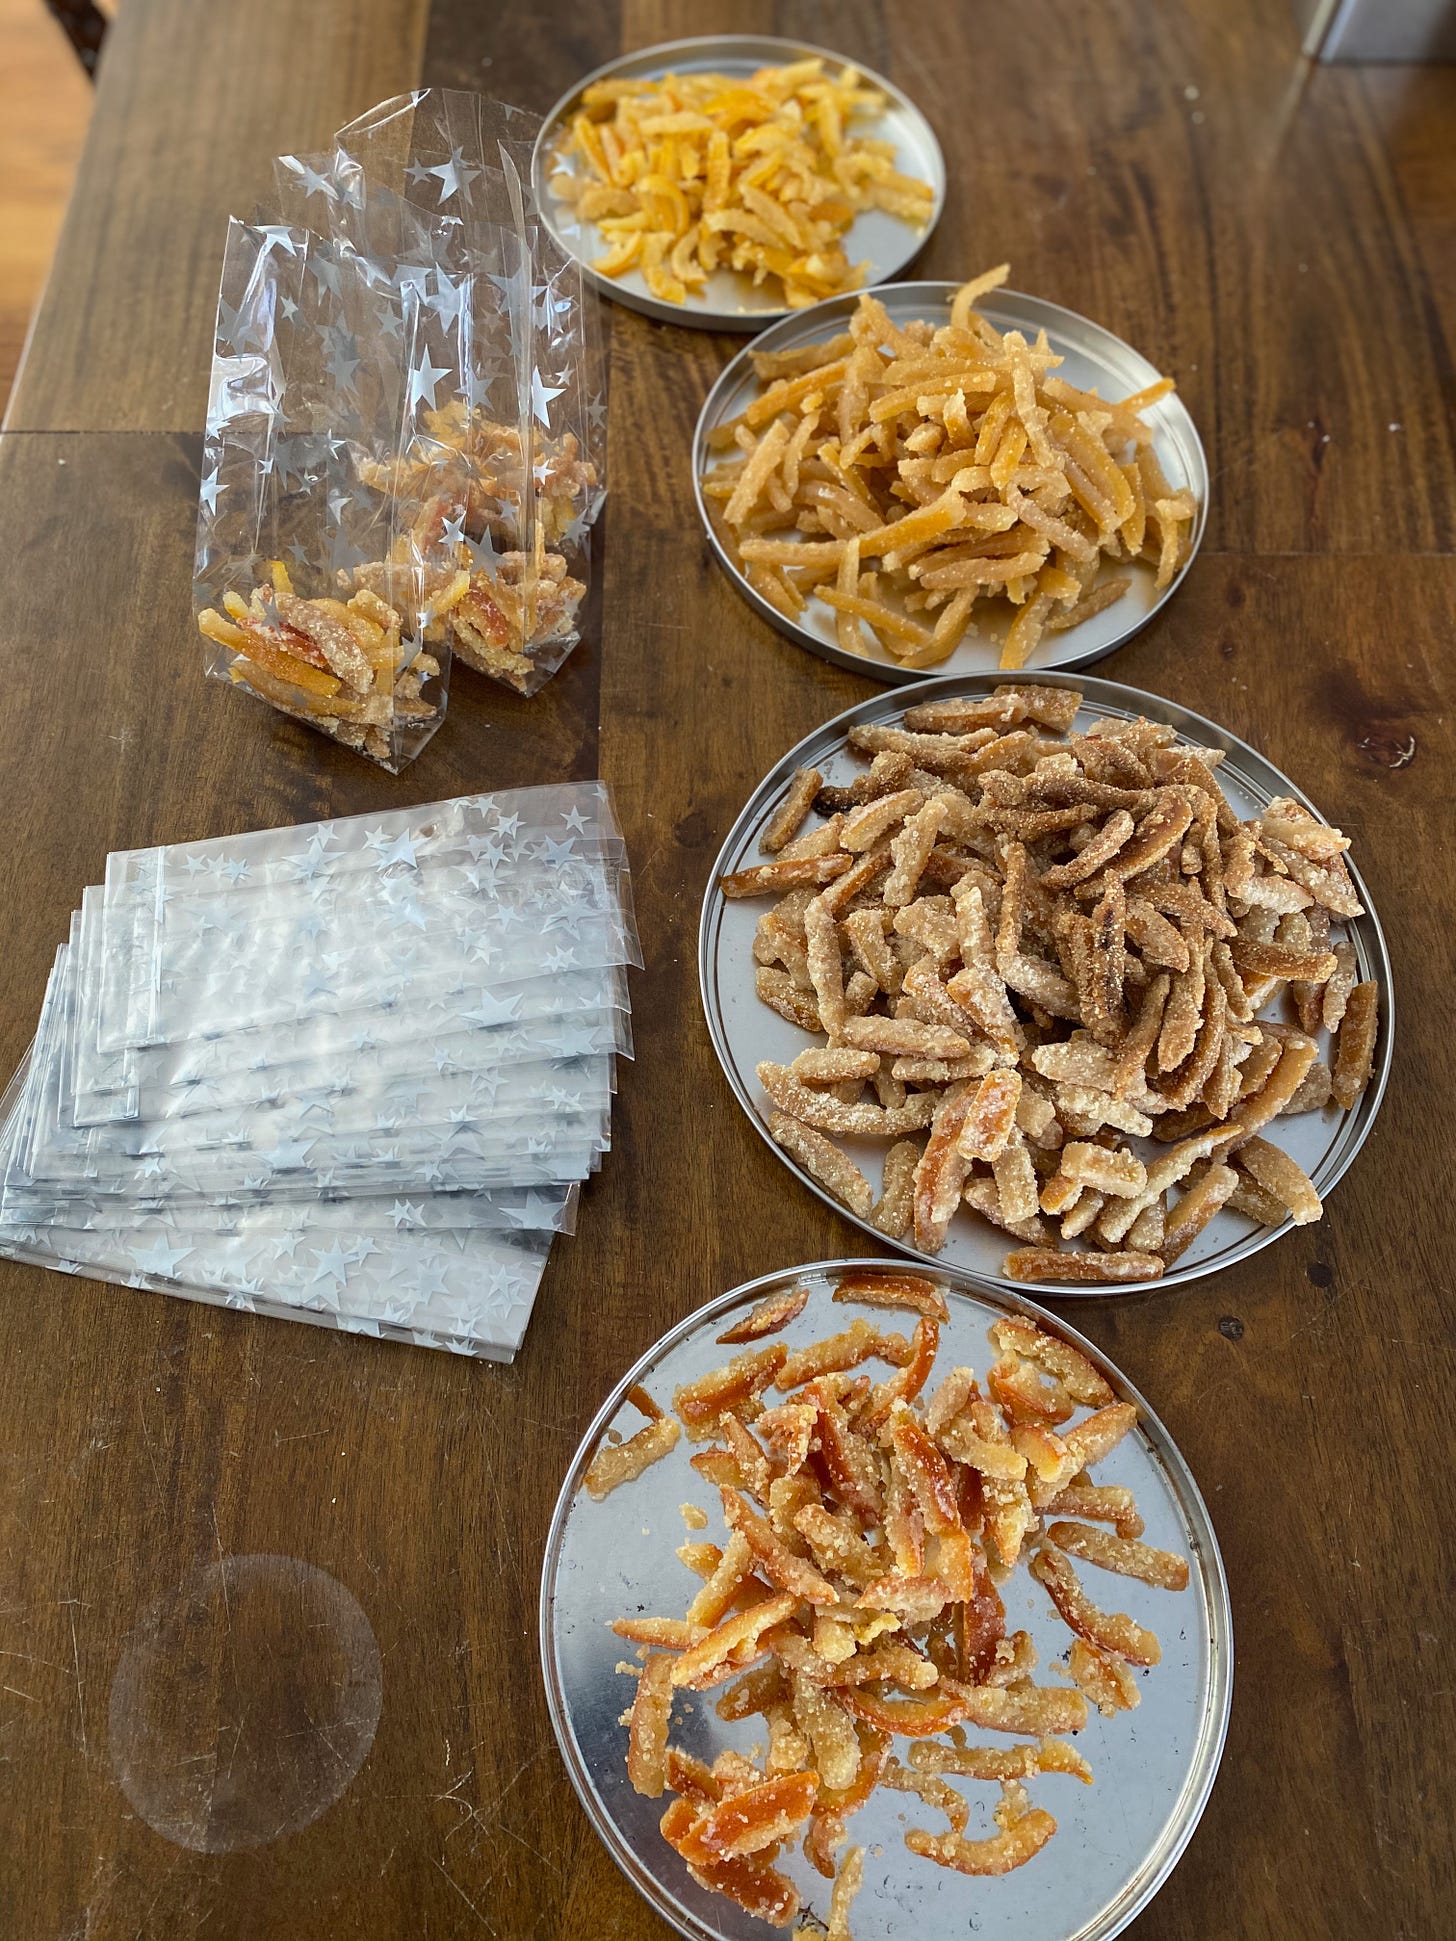 Four plates of candied peel—Meyer lemon, lemon, orange, and blood orange—sit on a wooden table. There are also two small clear gift bags partially filled with peel, and a big stack of unfilled gift bags.